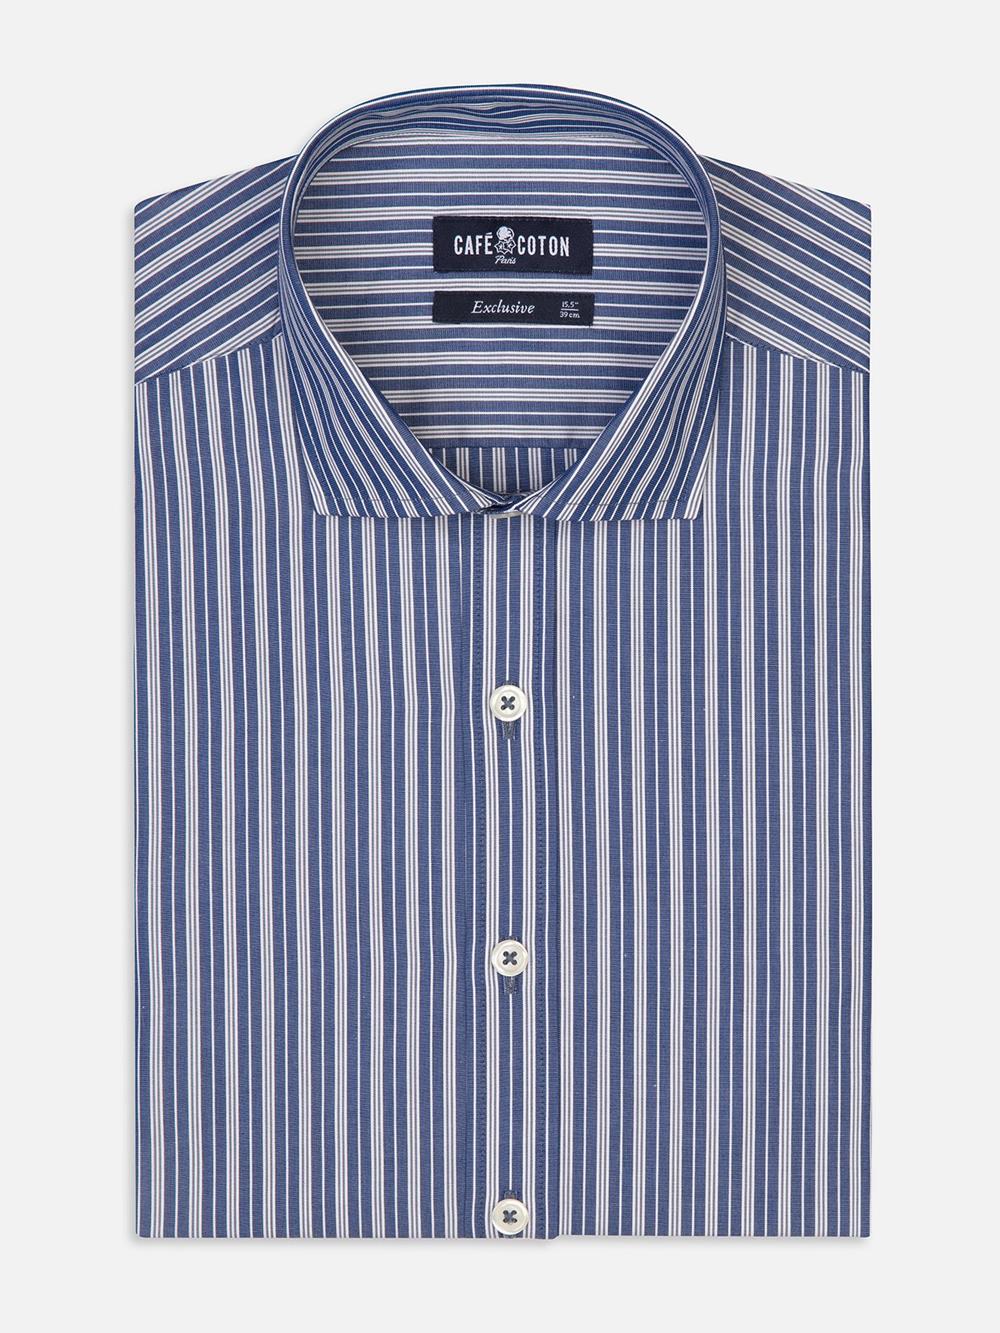 Willem navy and grey striped shirt